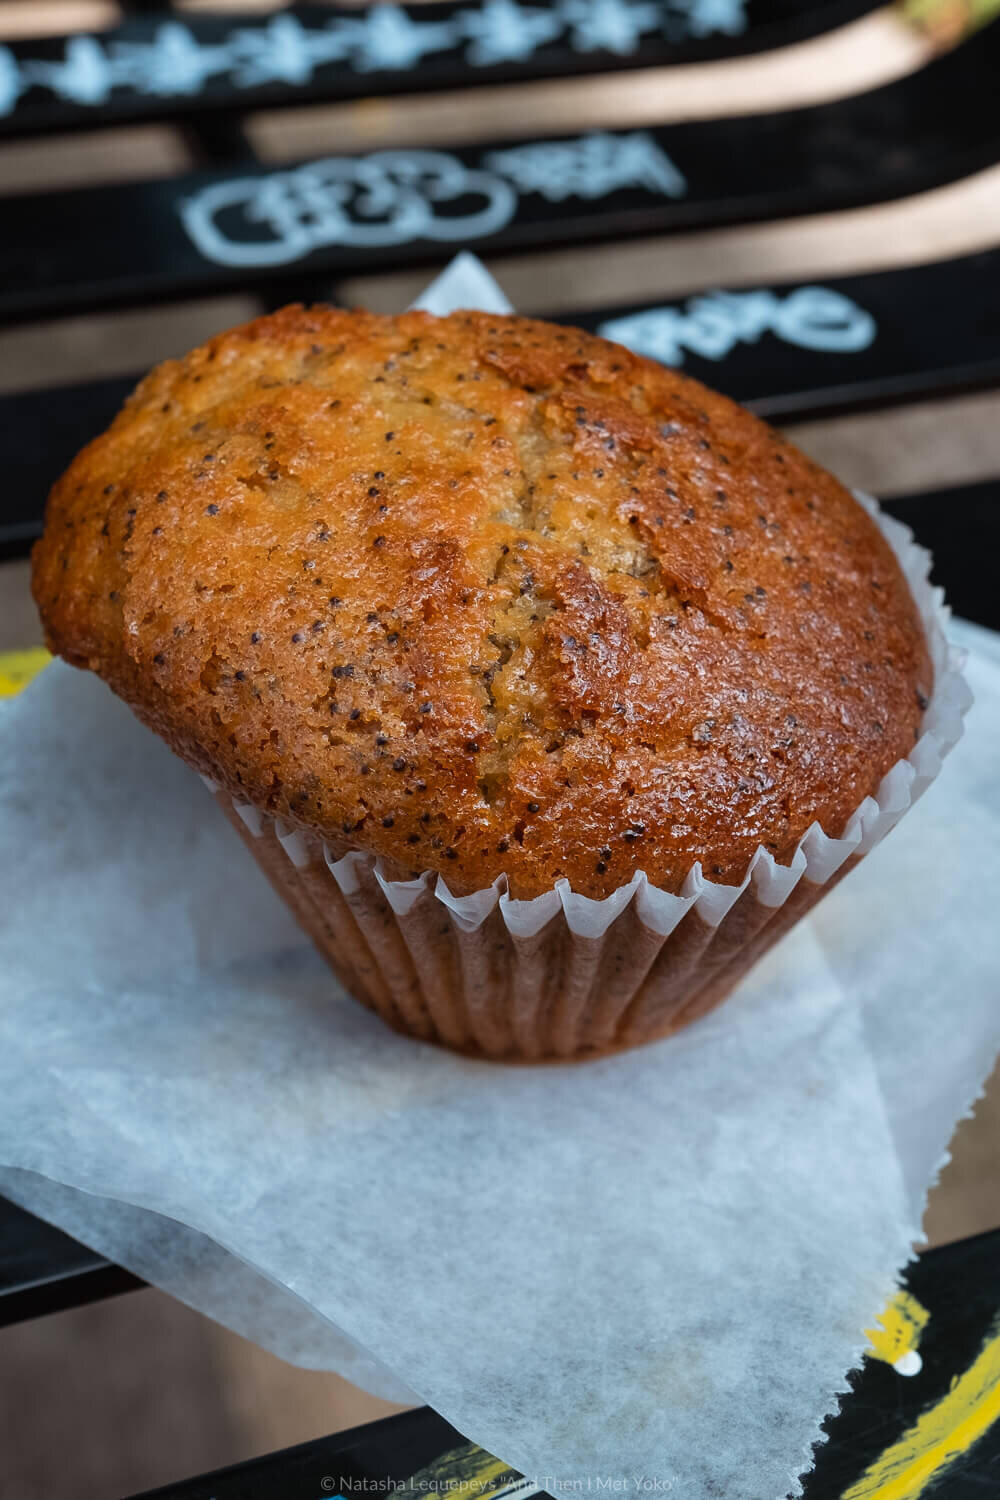 Muffin from Logan Square Farmers Market in Chicago, USA. Travel photography and guide by © Natasha Lequepeys for "And Then I Met Yoko". #chicago #usa #travelblog #travelphotography